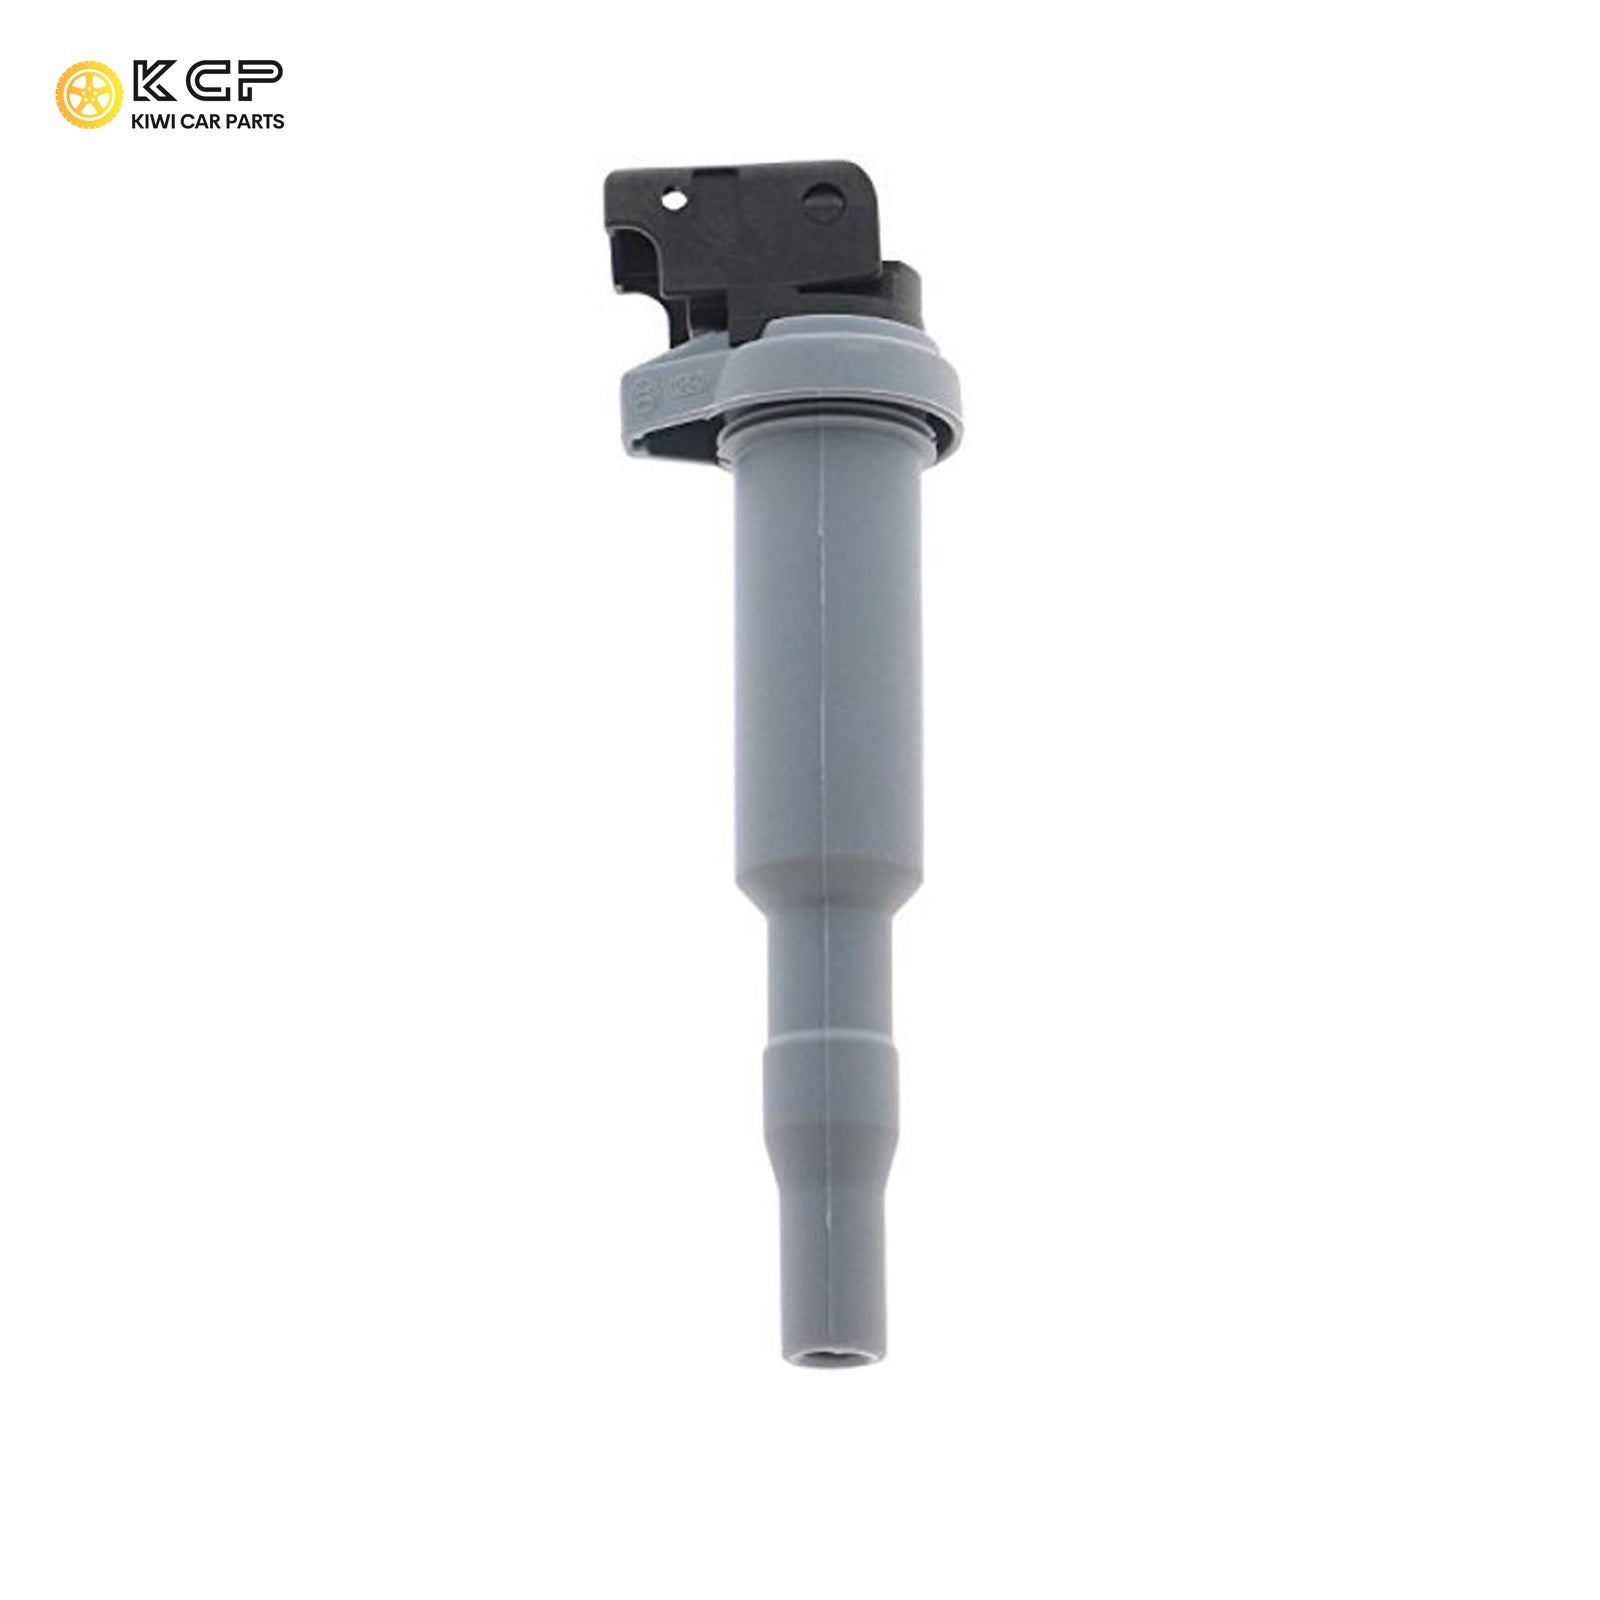 Bosch Ignition Coil 0221504800 Suitable For 2006 - 2018 BMW 1 2 3 4 5 6 7 Series, M2, M3, M4, X1, X3, X5, X6, Z4, Mini Cooper, Countryman, Paceman Car Ignition Coils 12120034098 Mini Cooper S Paceman 12120034098 BMW Mini Ignition kit NZ stock Auckland 